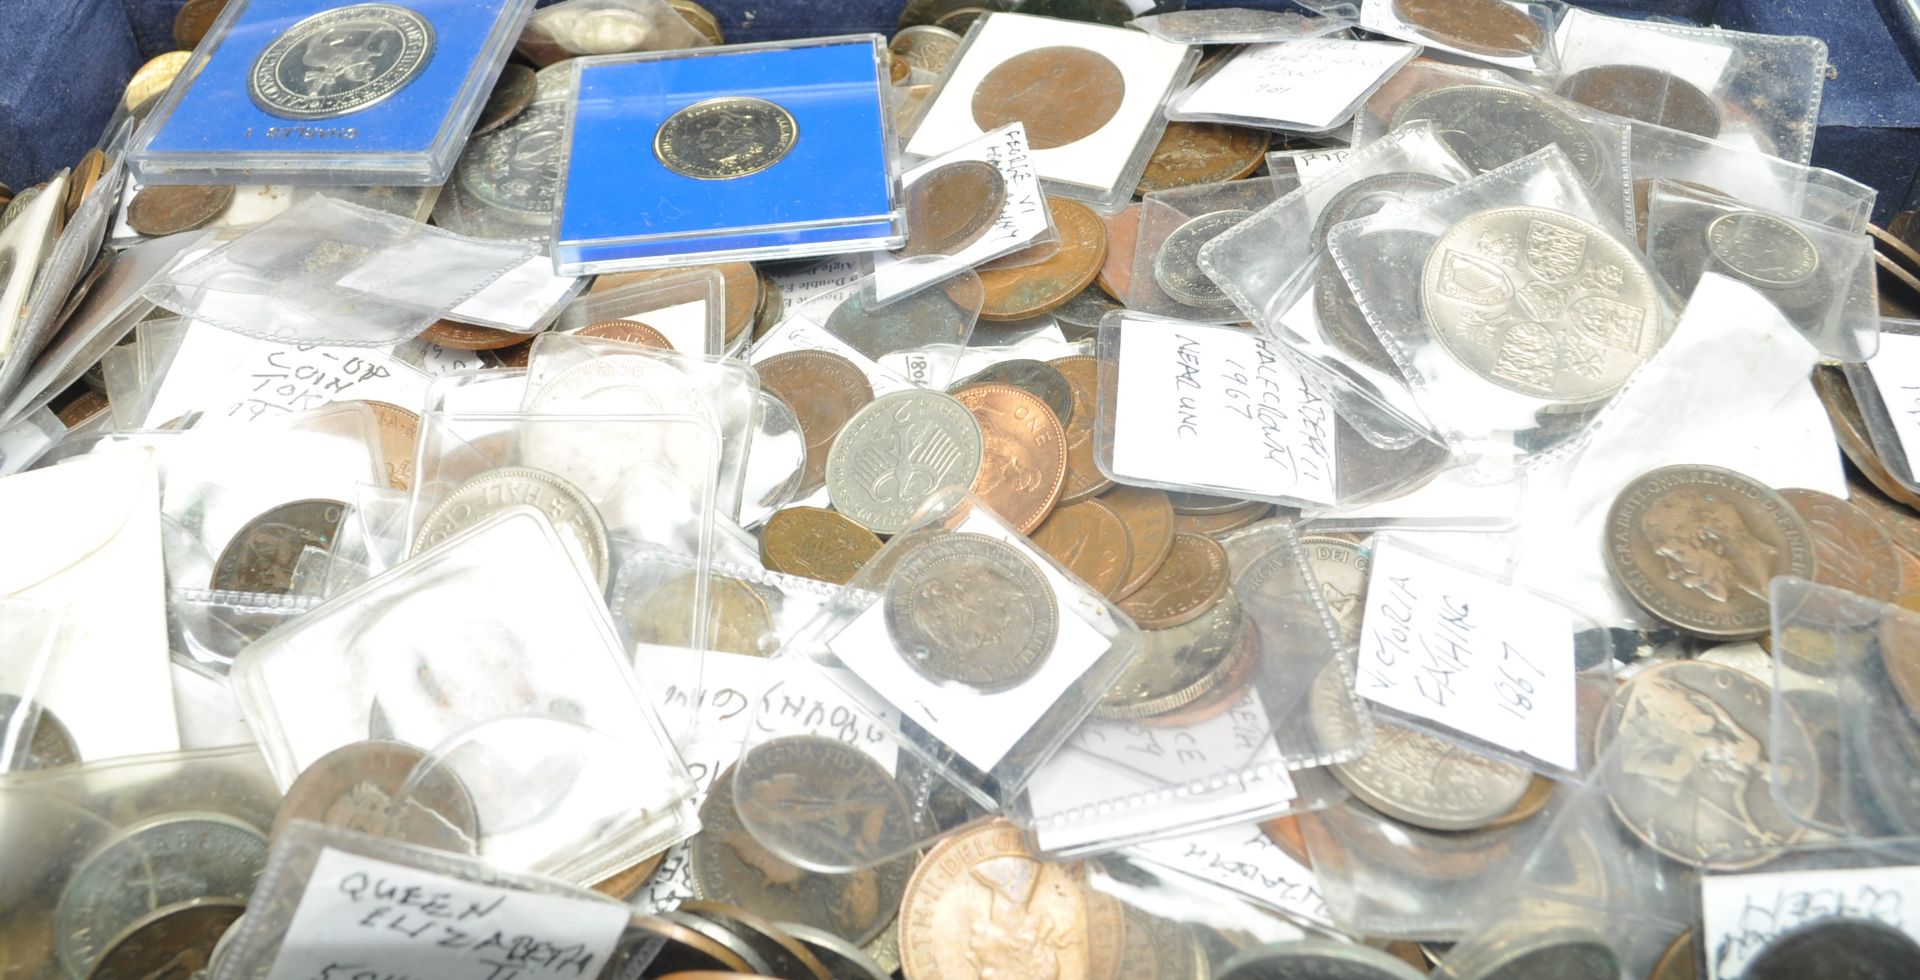 COINS - LARGE COLLECTION OF EARLY 20TH CENTURY COINS - Image 6 of 8